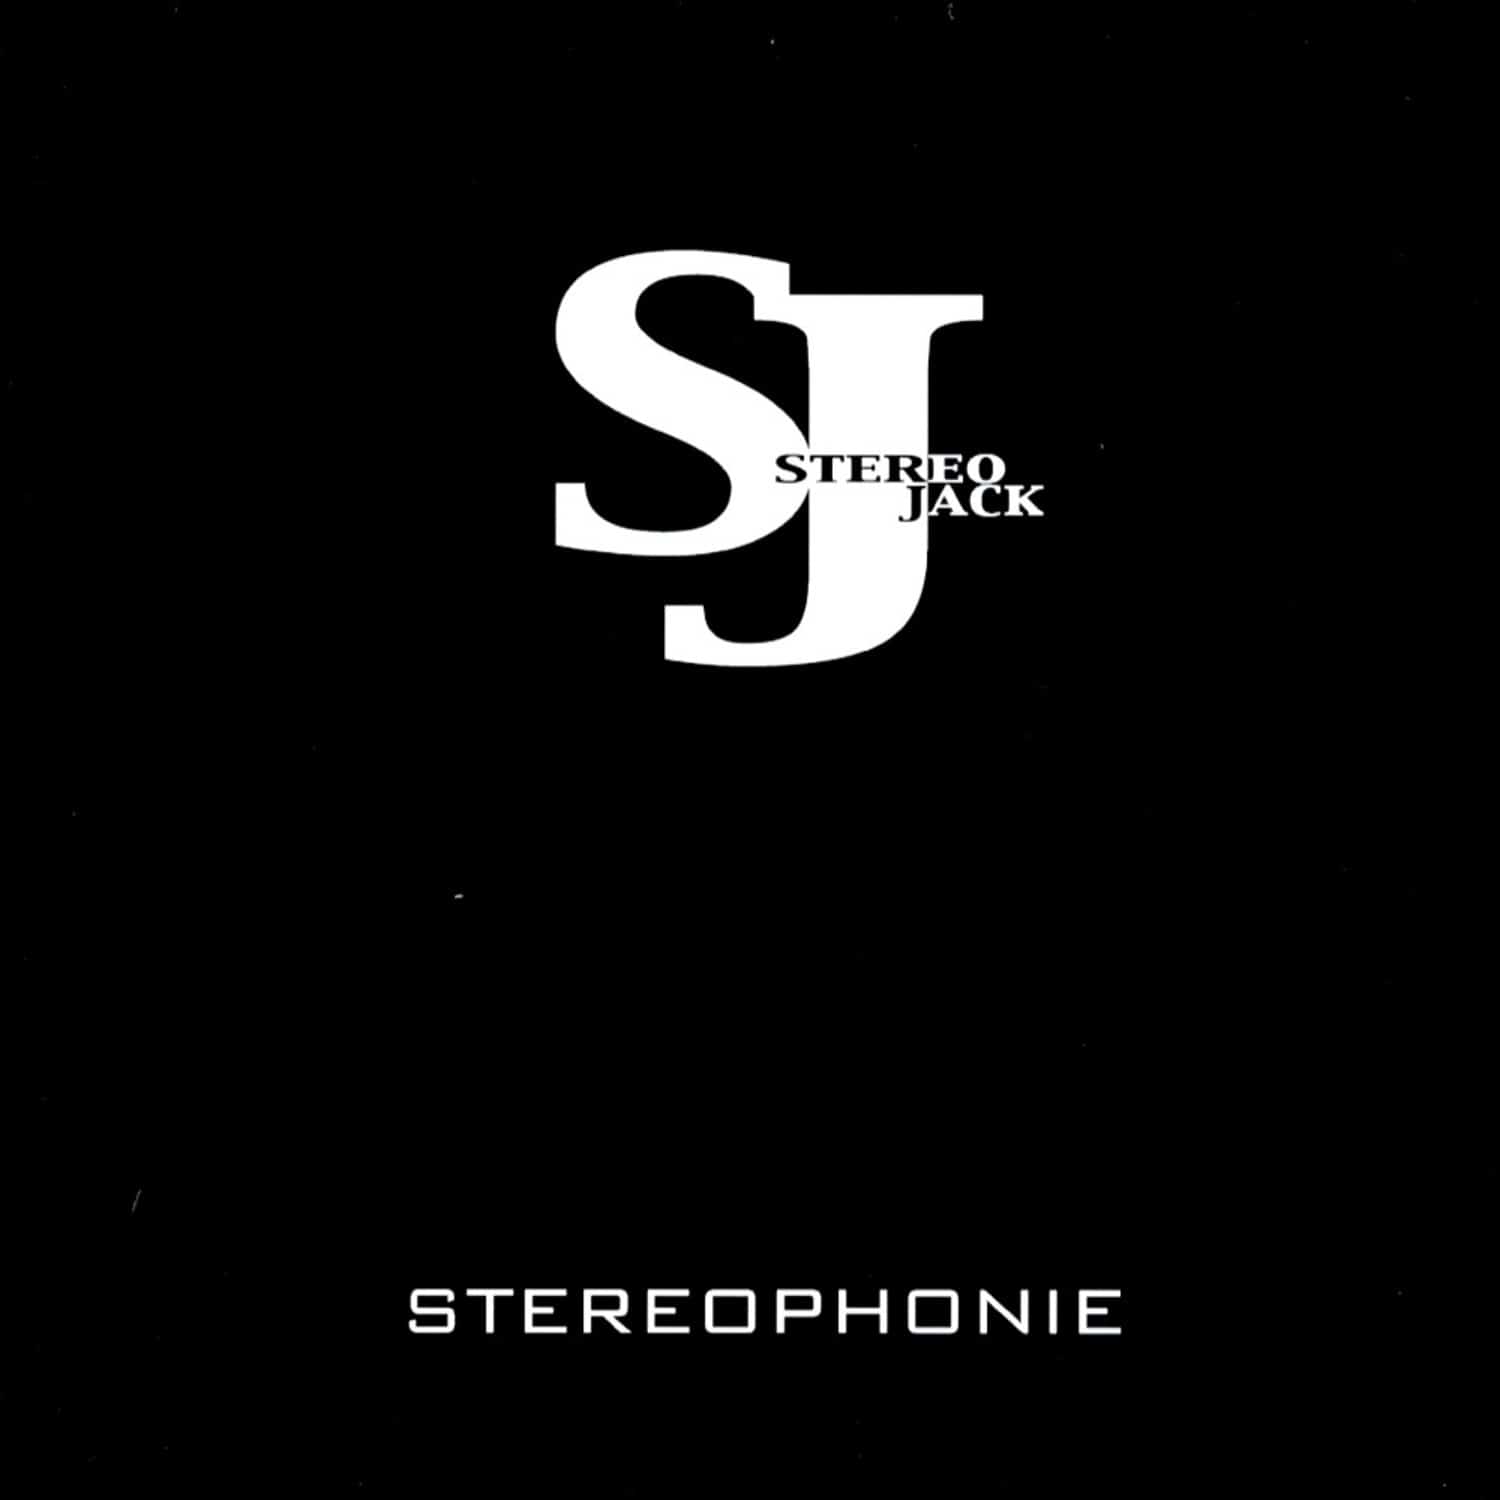 Stereo Jack - STEREOPHONIE 